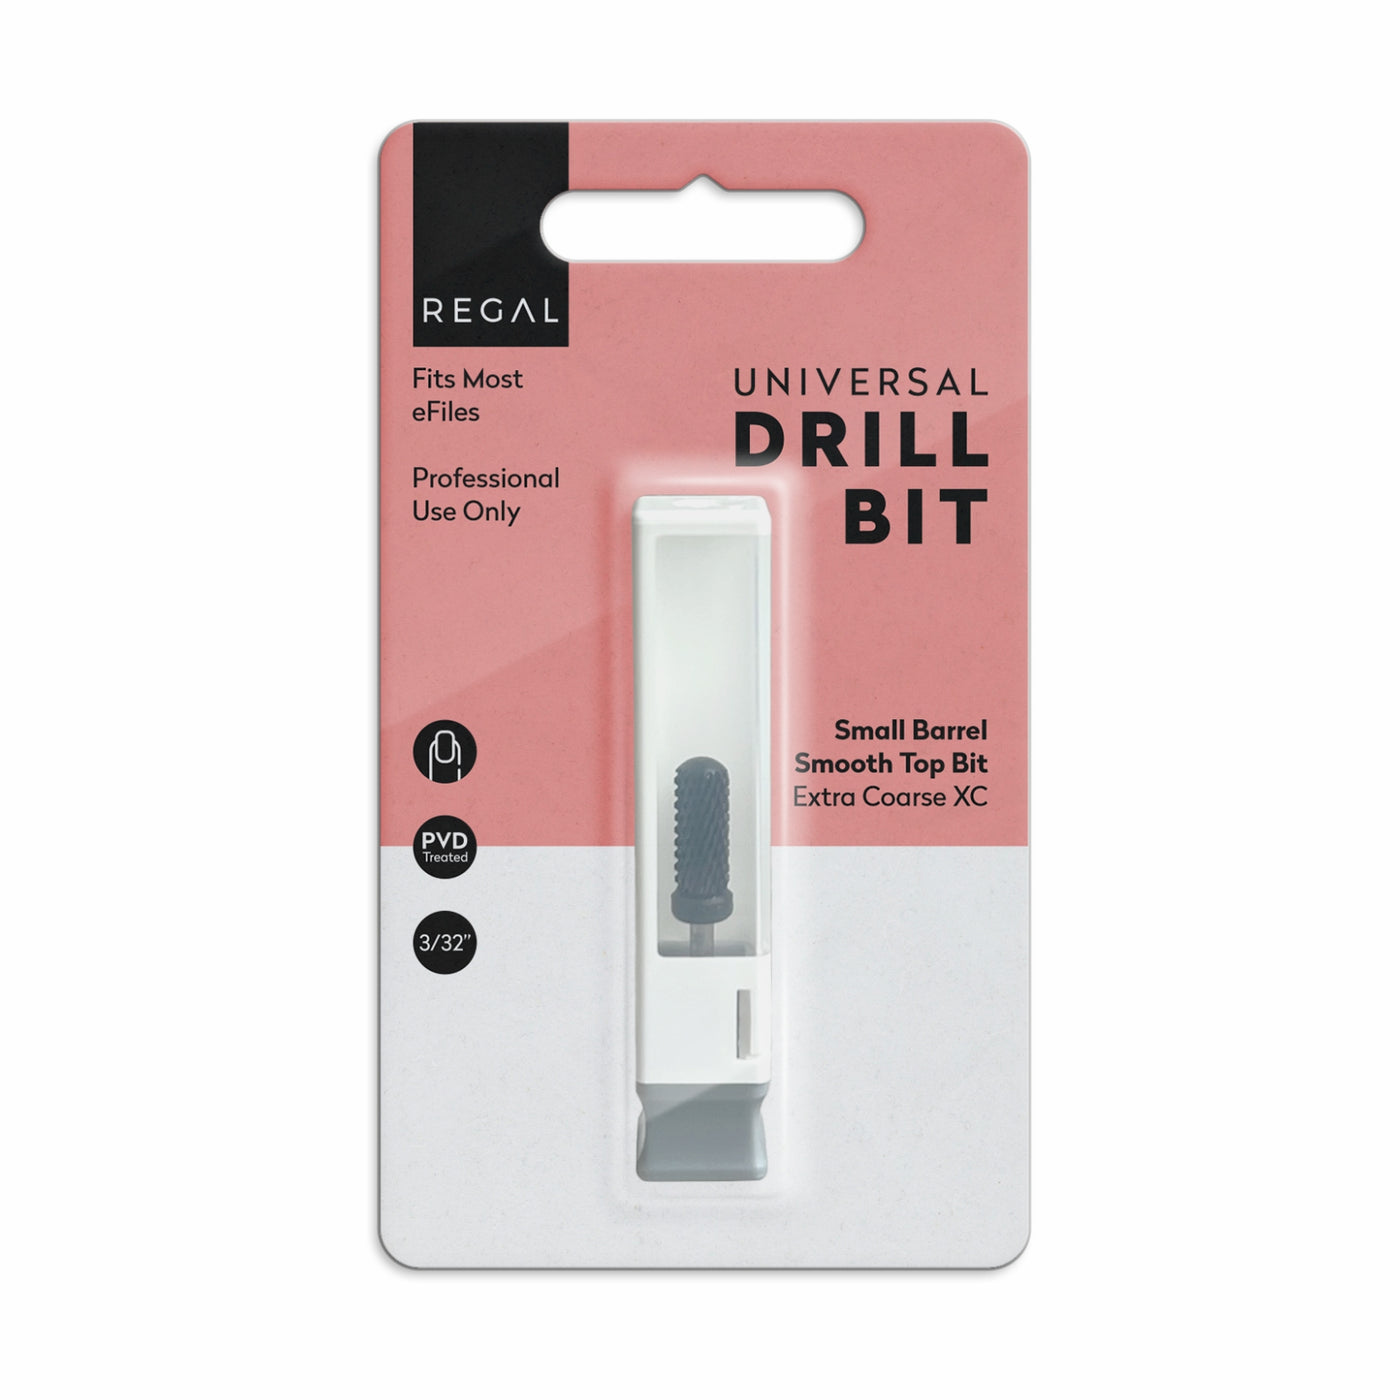 Regal by Anh E-File Drill Bit - Small Barrel Smooth Top Bit - Extra Coarse XC